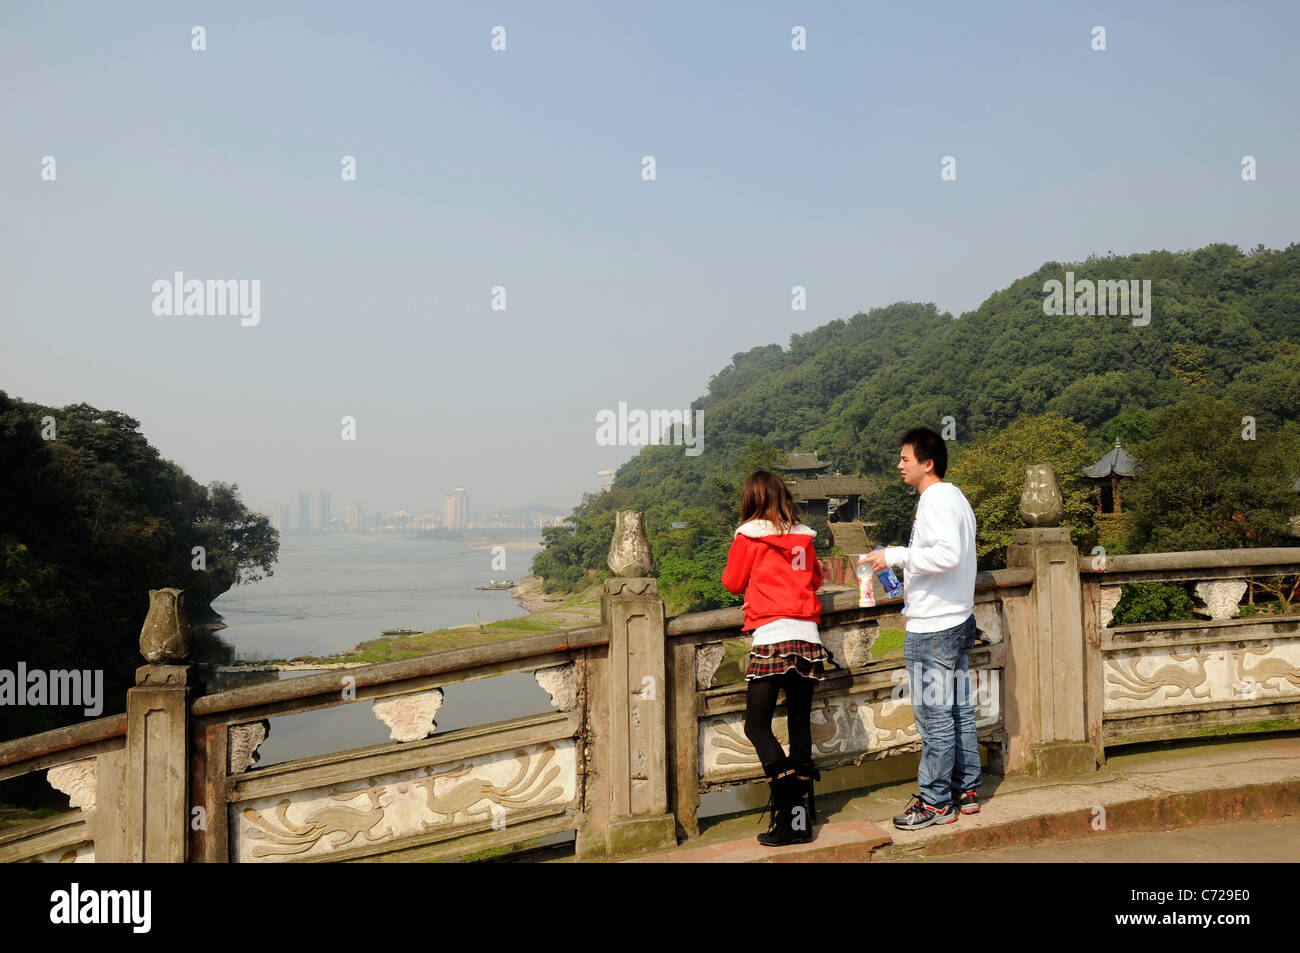 A couple of young Chinese tourists looking out towards a city in the distance. Dafo, Leshan, China. Showing pollution in the air Stock Photo